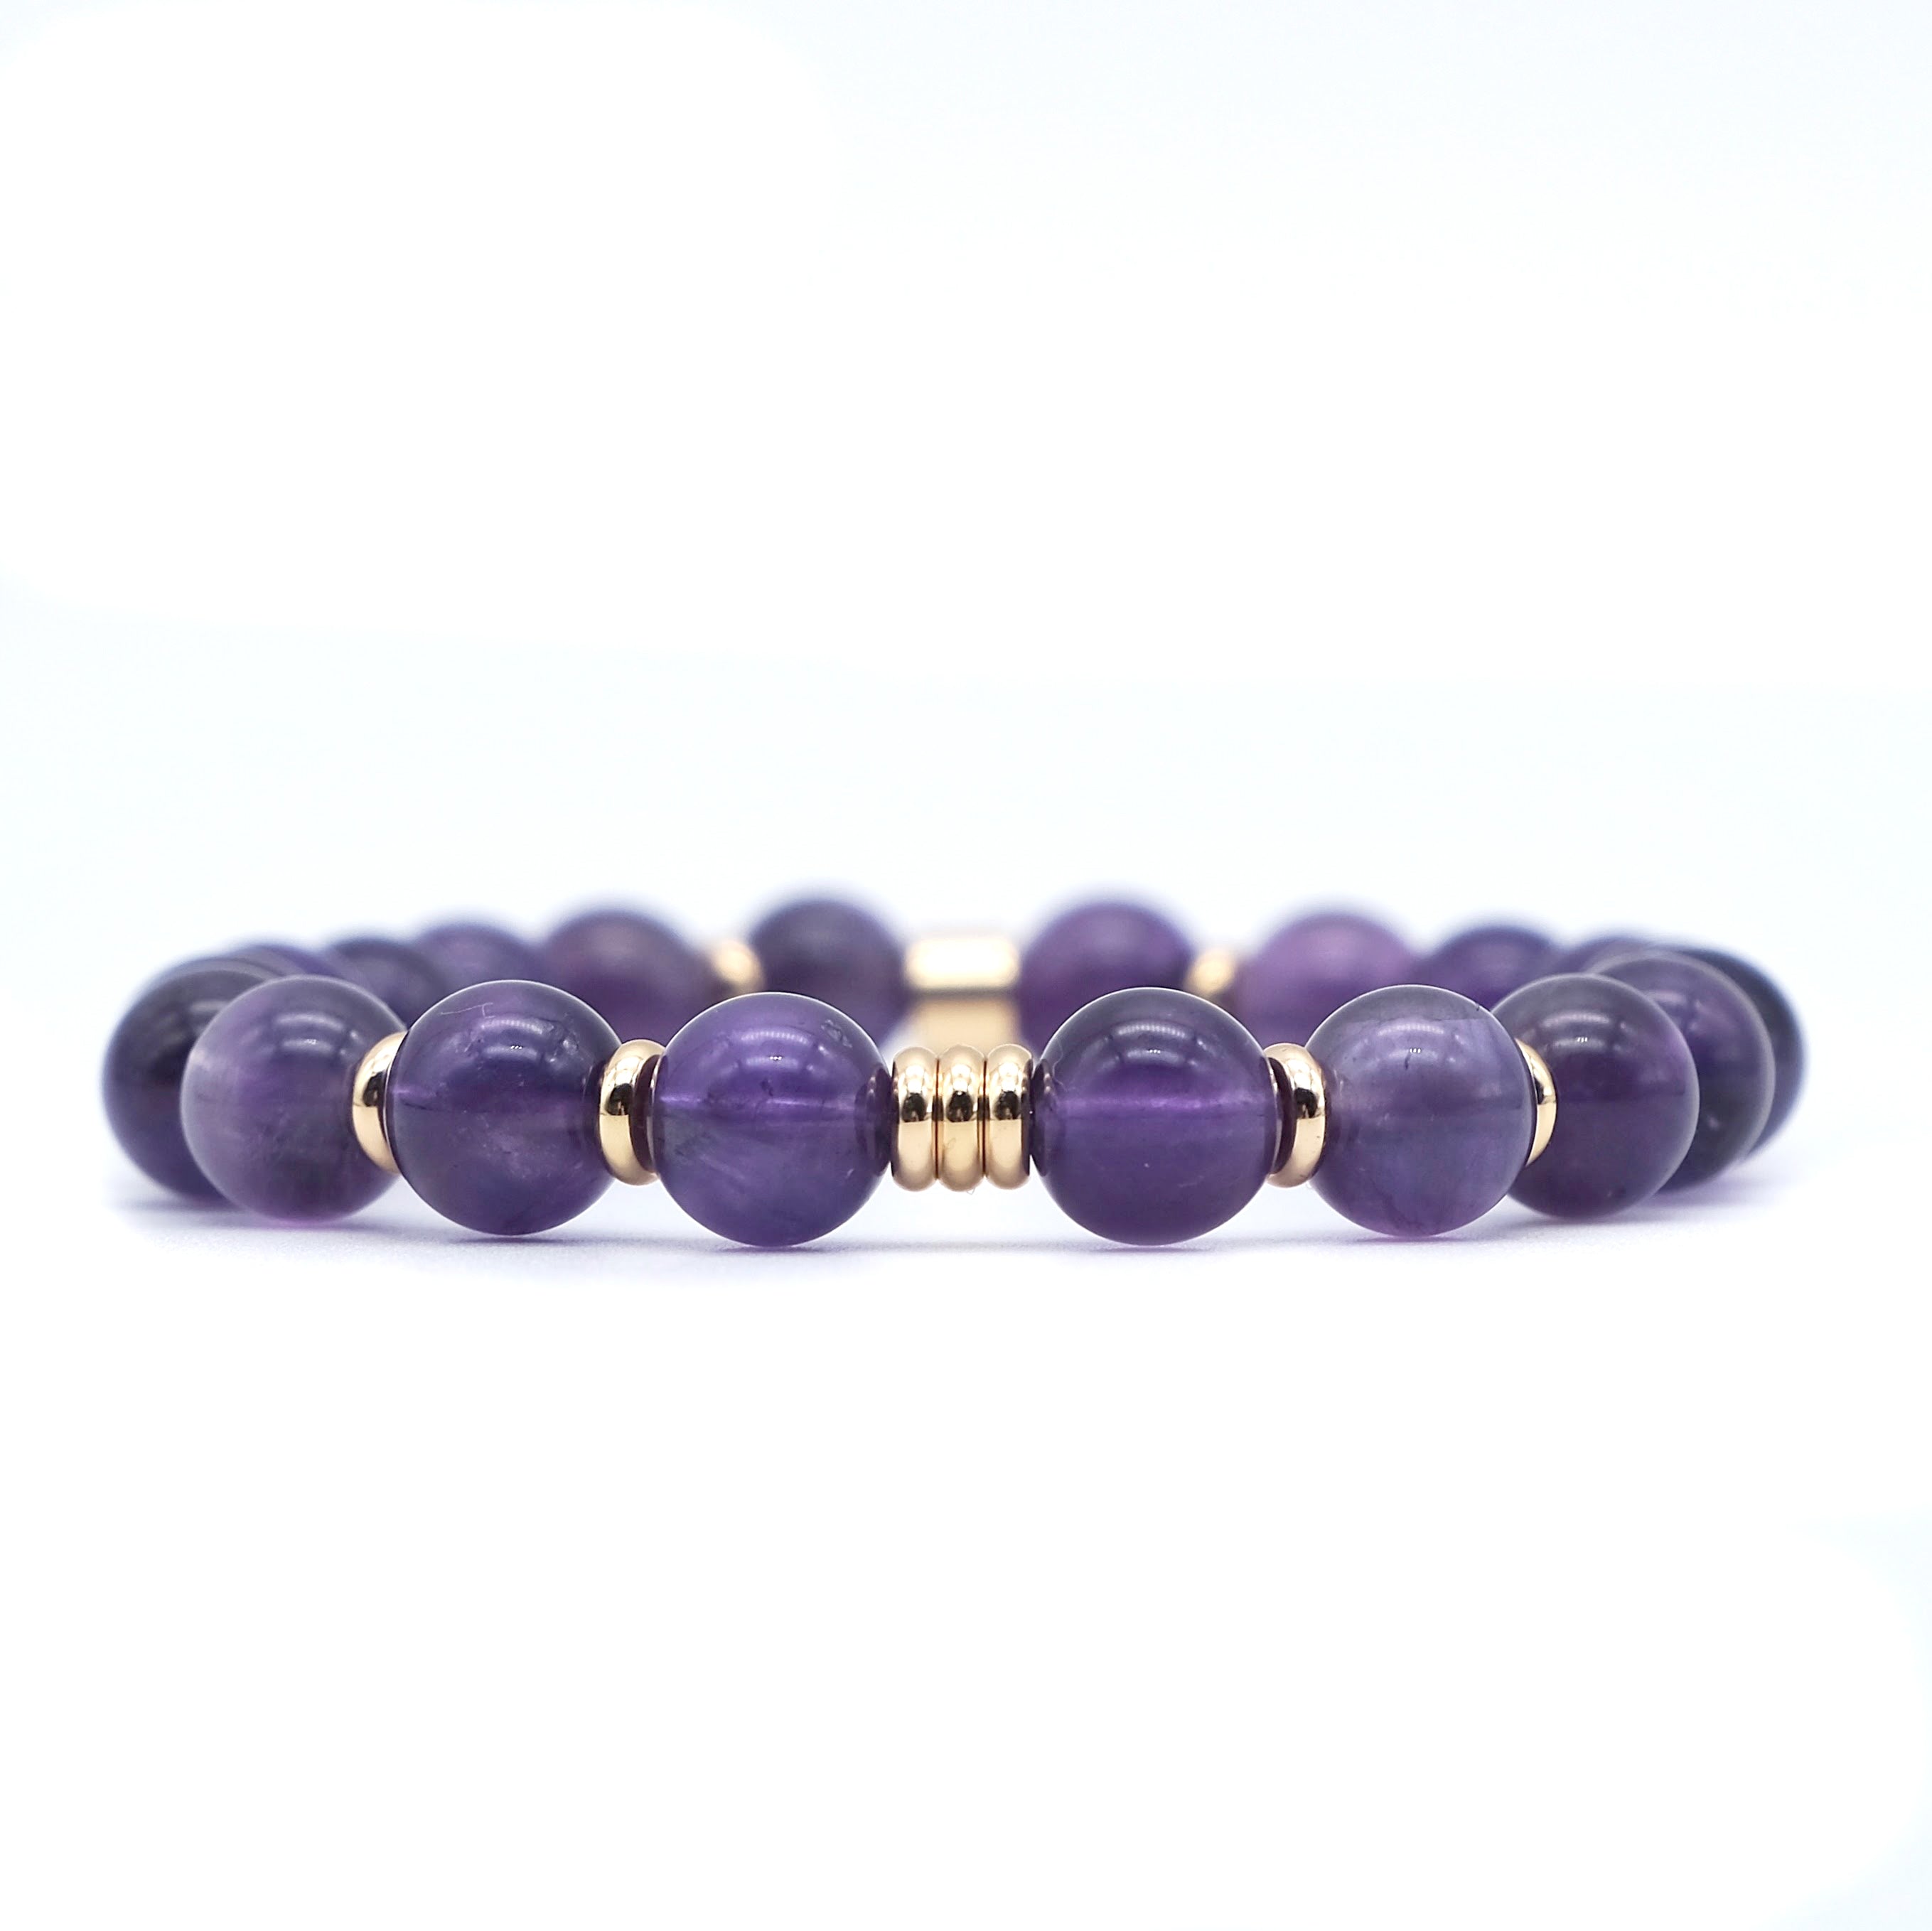 Amethyst Gemstone Bracelet with 18ct gold plated accessories